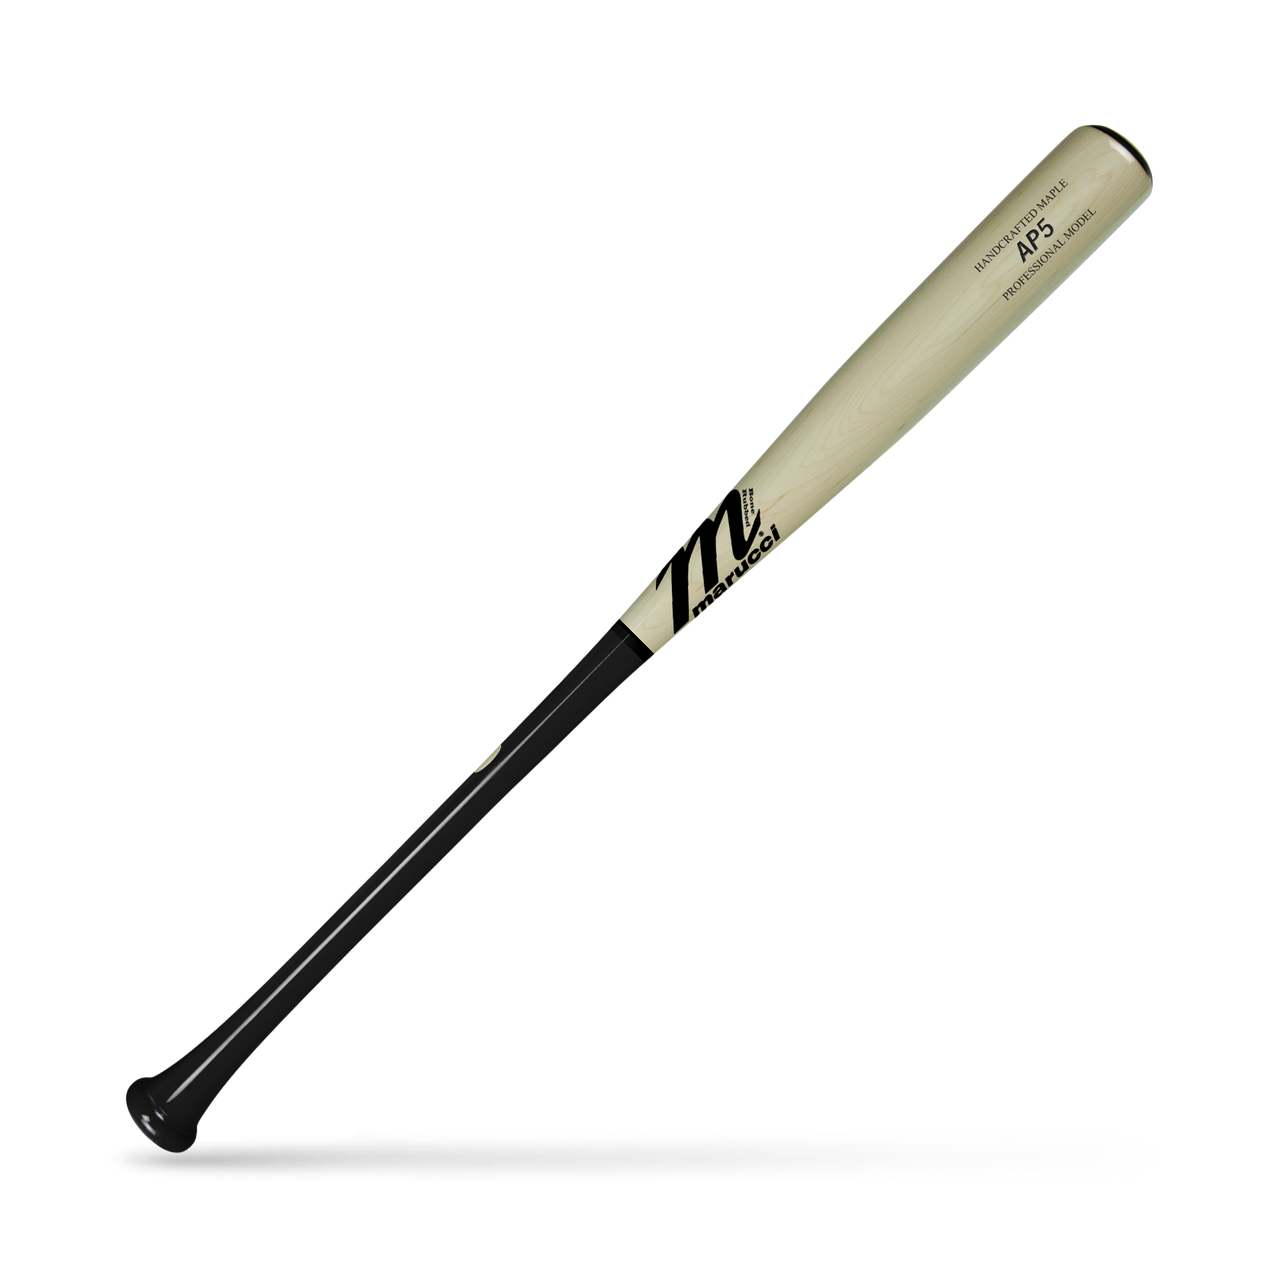 The Marucci AP5 Albert Pujols Maple Wood Bat is a top-of-the-line option for experienced players looking for a premium wood bat. Handcrafted from the highest quality maple wood, this bat is made with the utmost attention to detail and quality. One of the standout features of this bat is the bone rubbing process, which is used to achieve the ultimate wood density. This process involves rubbing the wood with bone to harden and densify it, resulting in a bat that is both durable and powerful. The AP5 also comes with big league-grade ink dot certification, ensuring that it meets the standards of professional baseball. This certification is a testament to the quality and performance of the bat. This bat is designed for players with experience hitting wood and is particularly well suited for players looking for an end-loaded feel. The end-loaded design provides added power and control, making it an excellent choice for experienced players looking to take their game to the next level. Overall, the Marucci AP5 Albert Pujols Maple Wood Bat is an outstanding choice for experienced players looking for a premium quality, handcrafted wood bat. This bat is built to perform and is designed to meet the standards of professional baseball. So, it's ideal for those players who want to take their game to the next level.